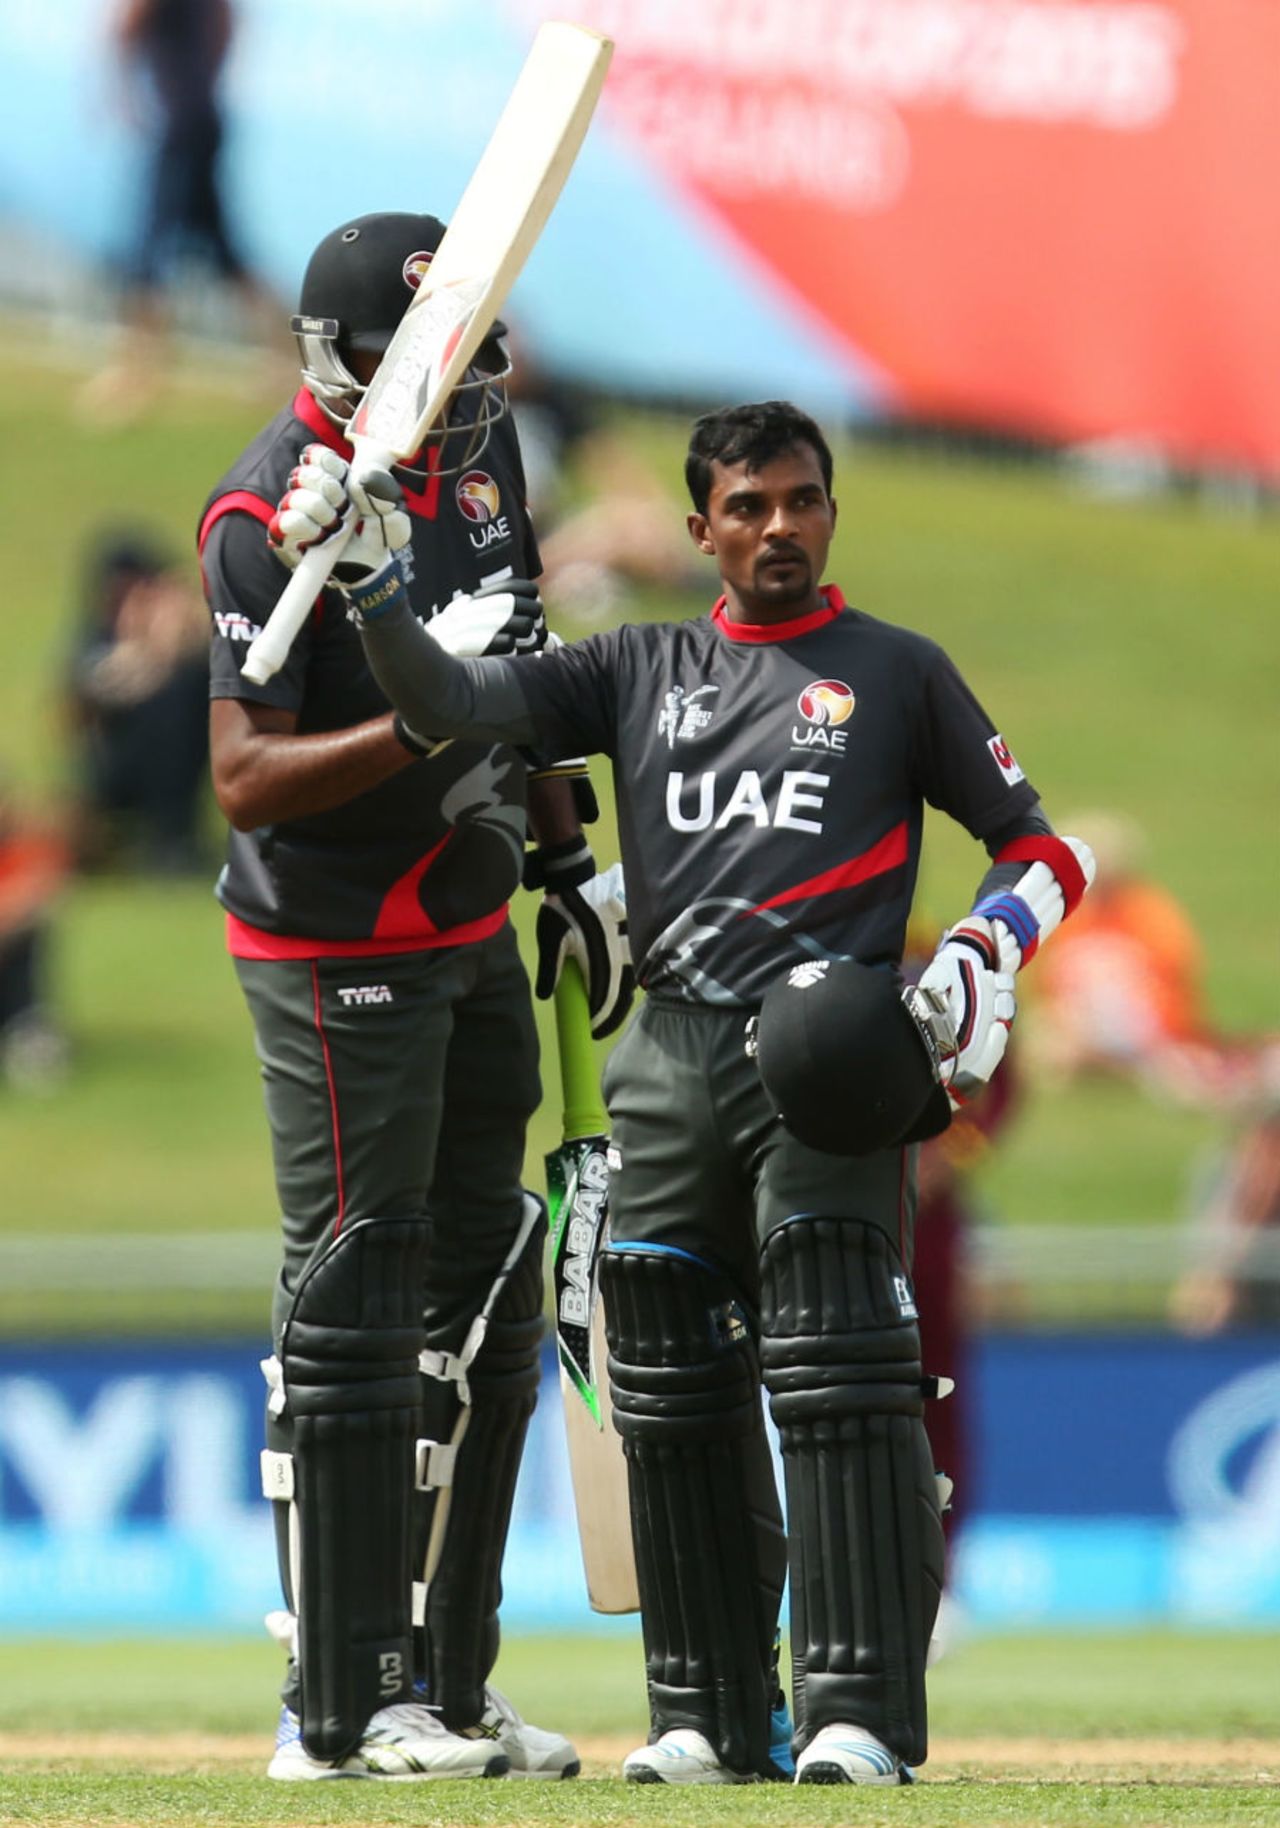 Nasir Aziz raises his bat after getting his maiden ODI fifty, United Arab Emirates v West Indies, World Cup 2015, Group B, Napier, March 15, 2015